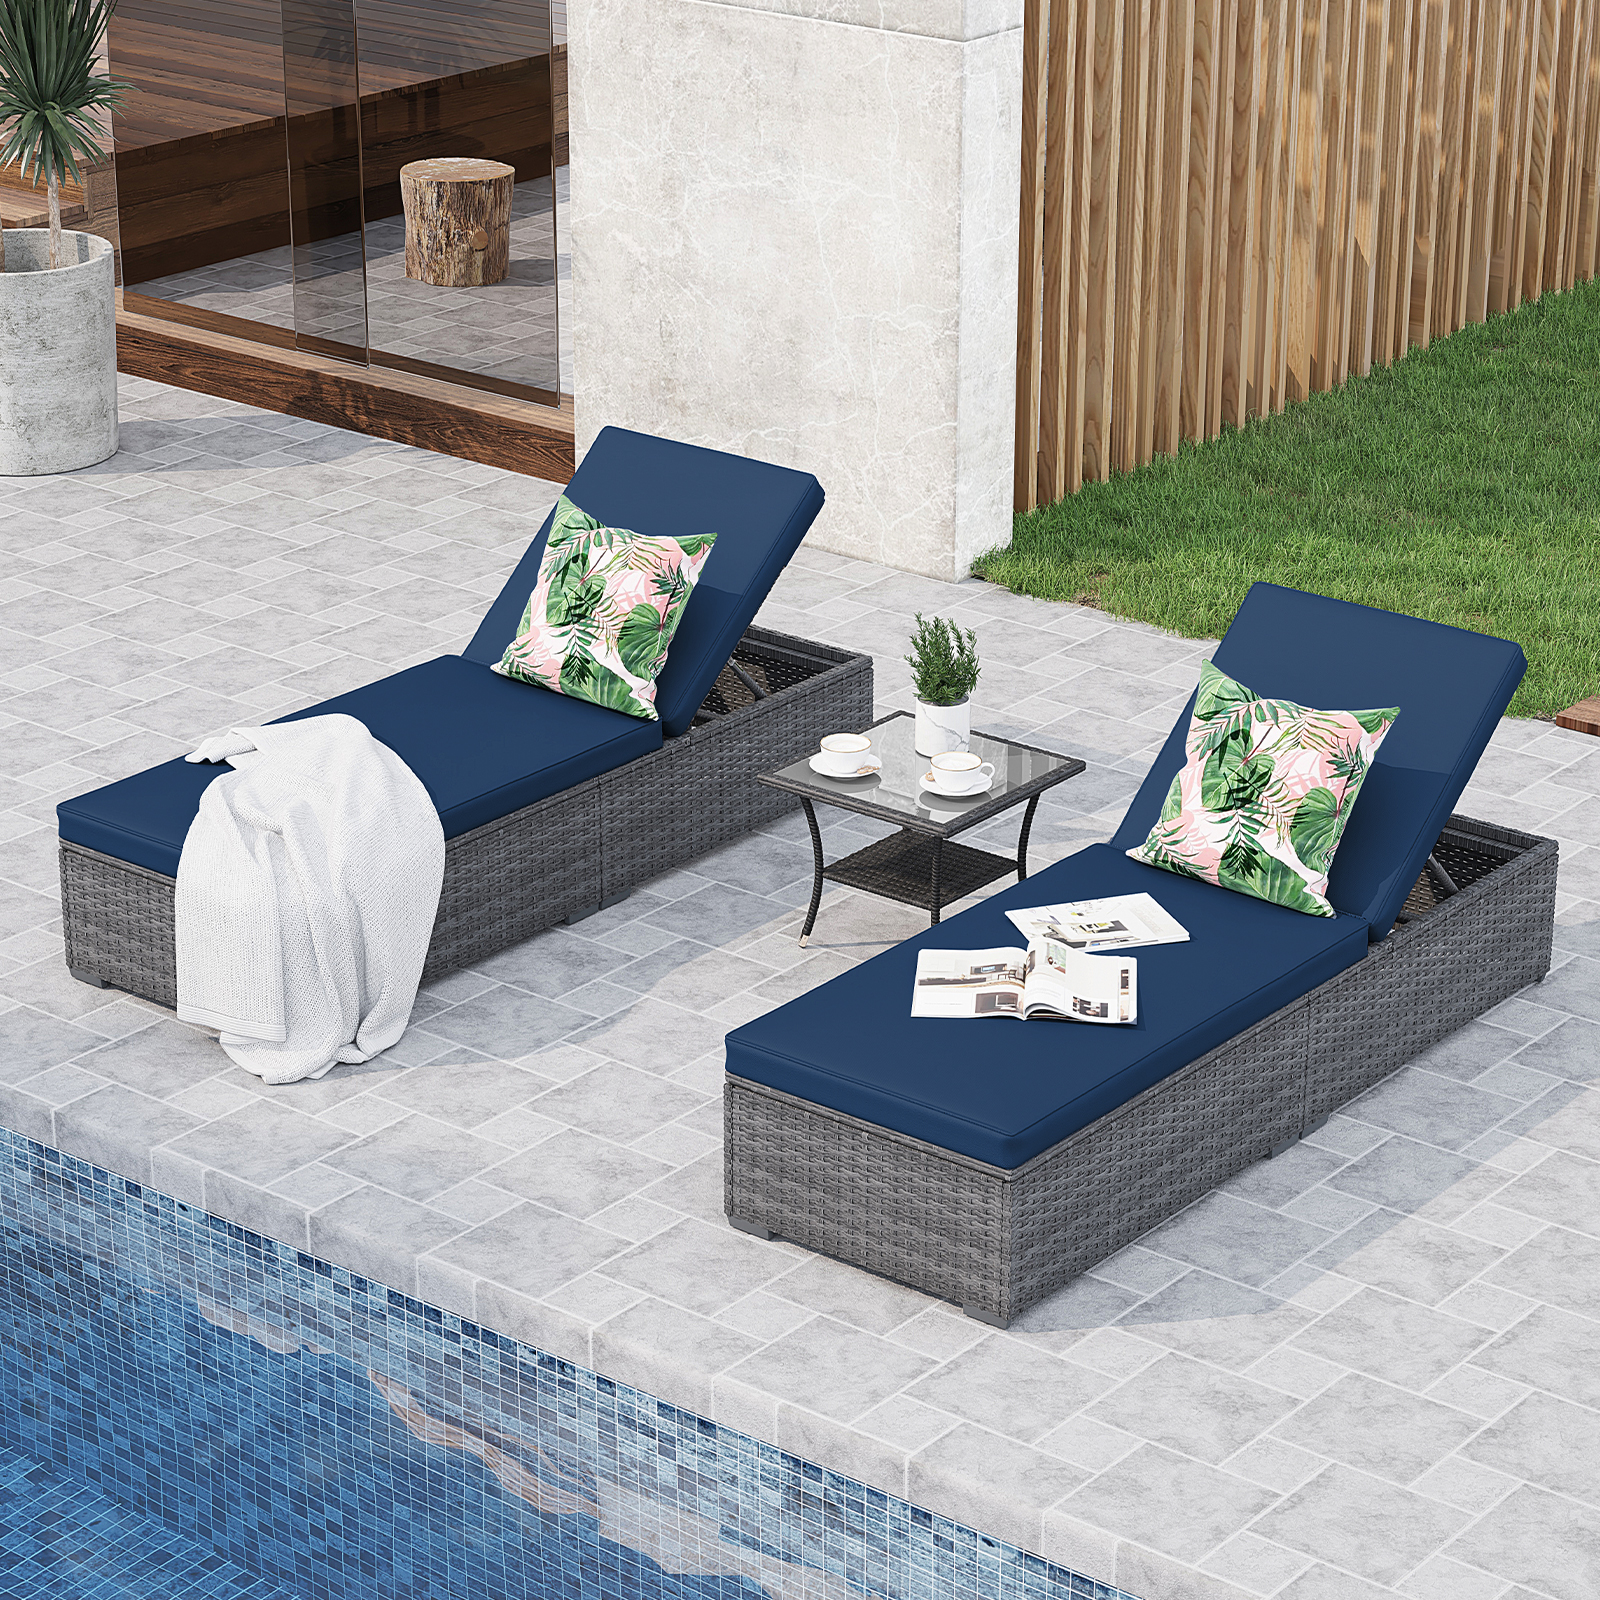 JOIVI Outdoor Chaise Lounge Chair, 3 Piece Patio Reclining Sun Lounger with Coffee Table, All Weather PE Rattan Adjustable Lounge Chair, Patio Pool Lounge Chairs with Removable Cushion, Navy Blue - image 1 of 8